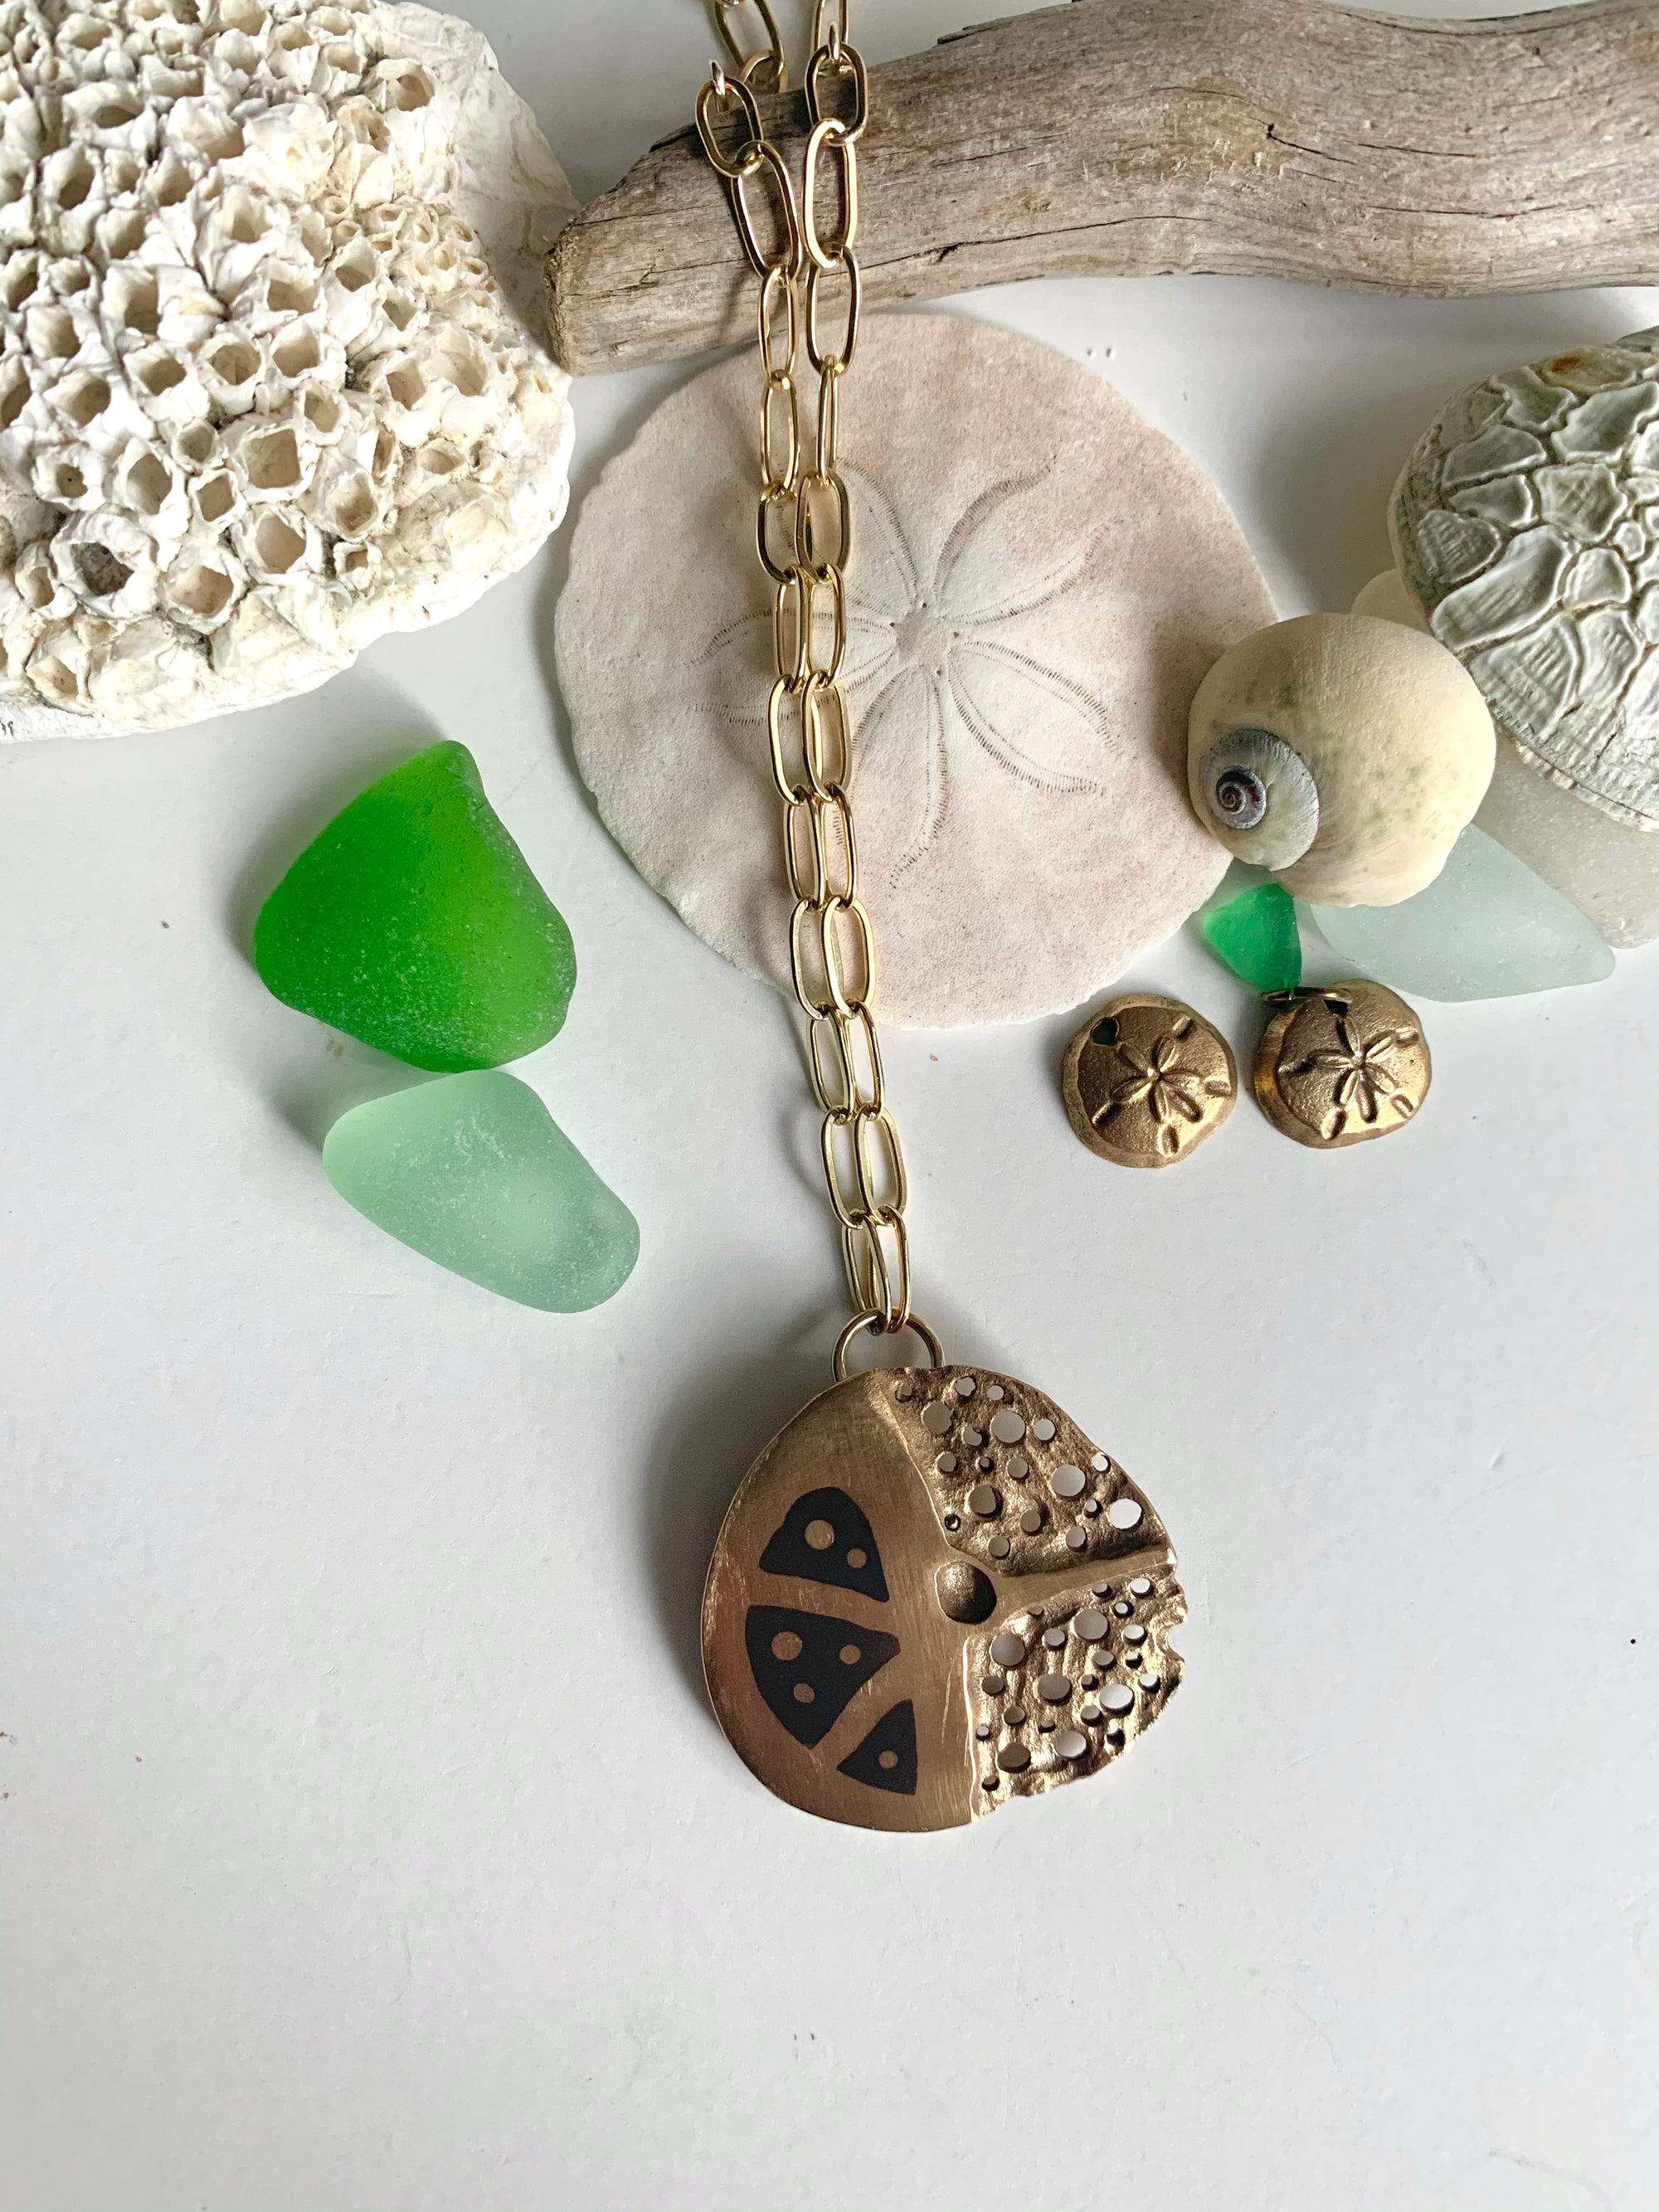 Seashells seaglass and handmade one of a kind necklace